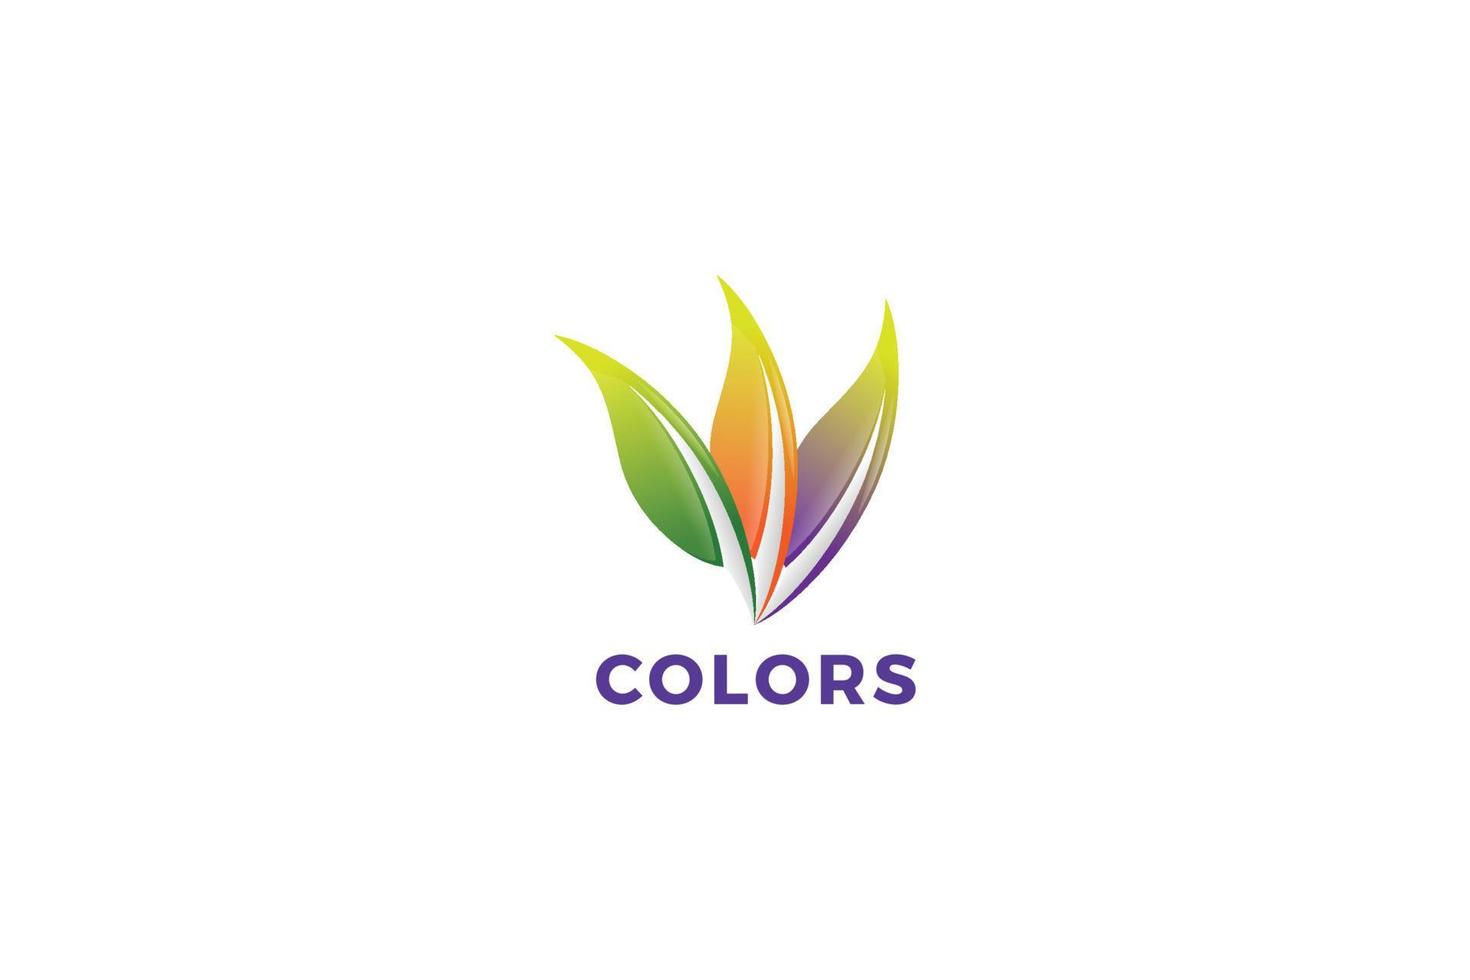 abstract colorful leaf or feather logo design vector